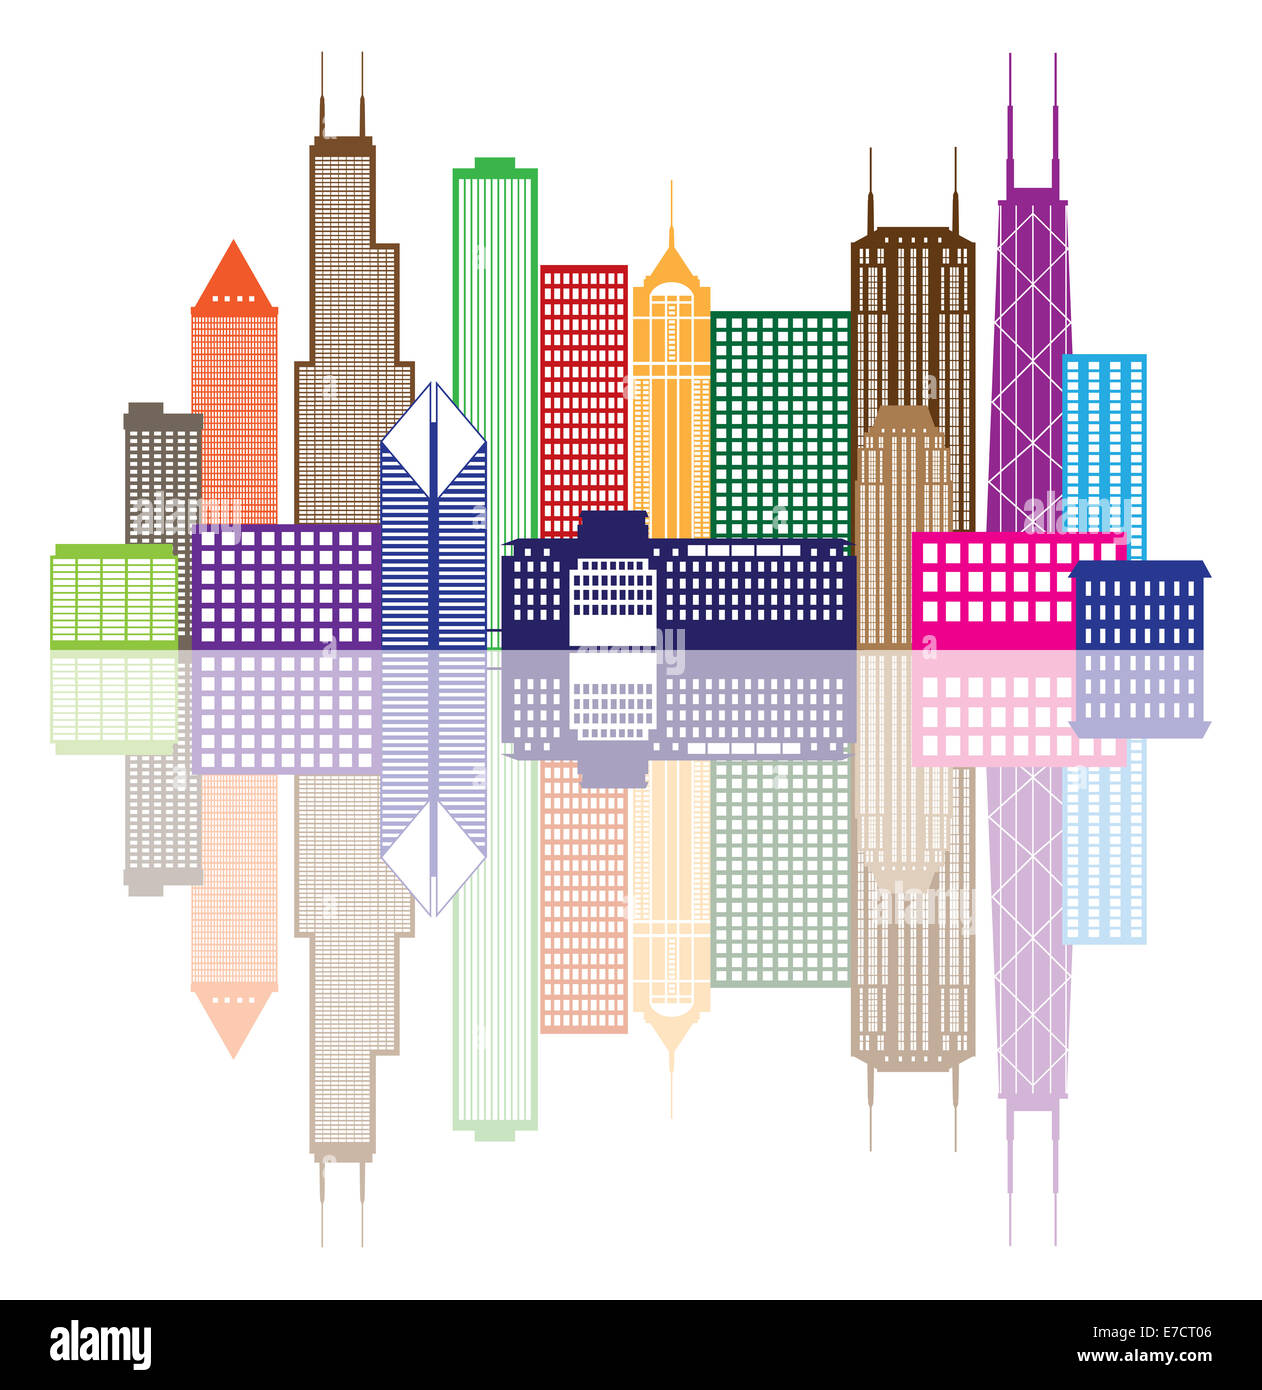 Chicago City Skyline Panorama Color Outline Silhouette with Reflection Isolated on White Background Illustration Stock Photo